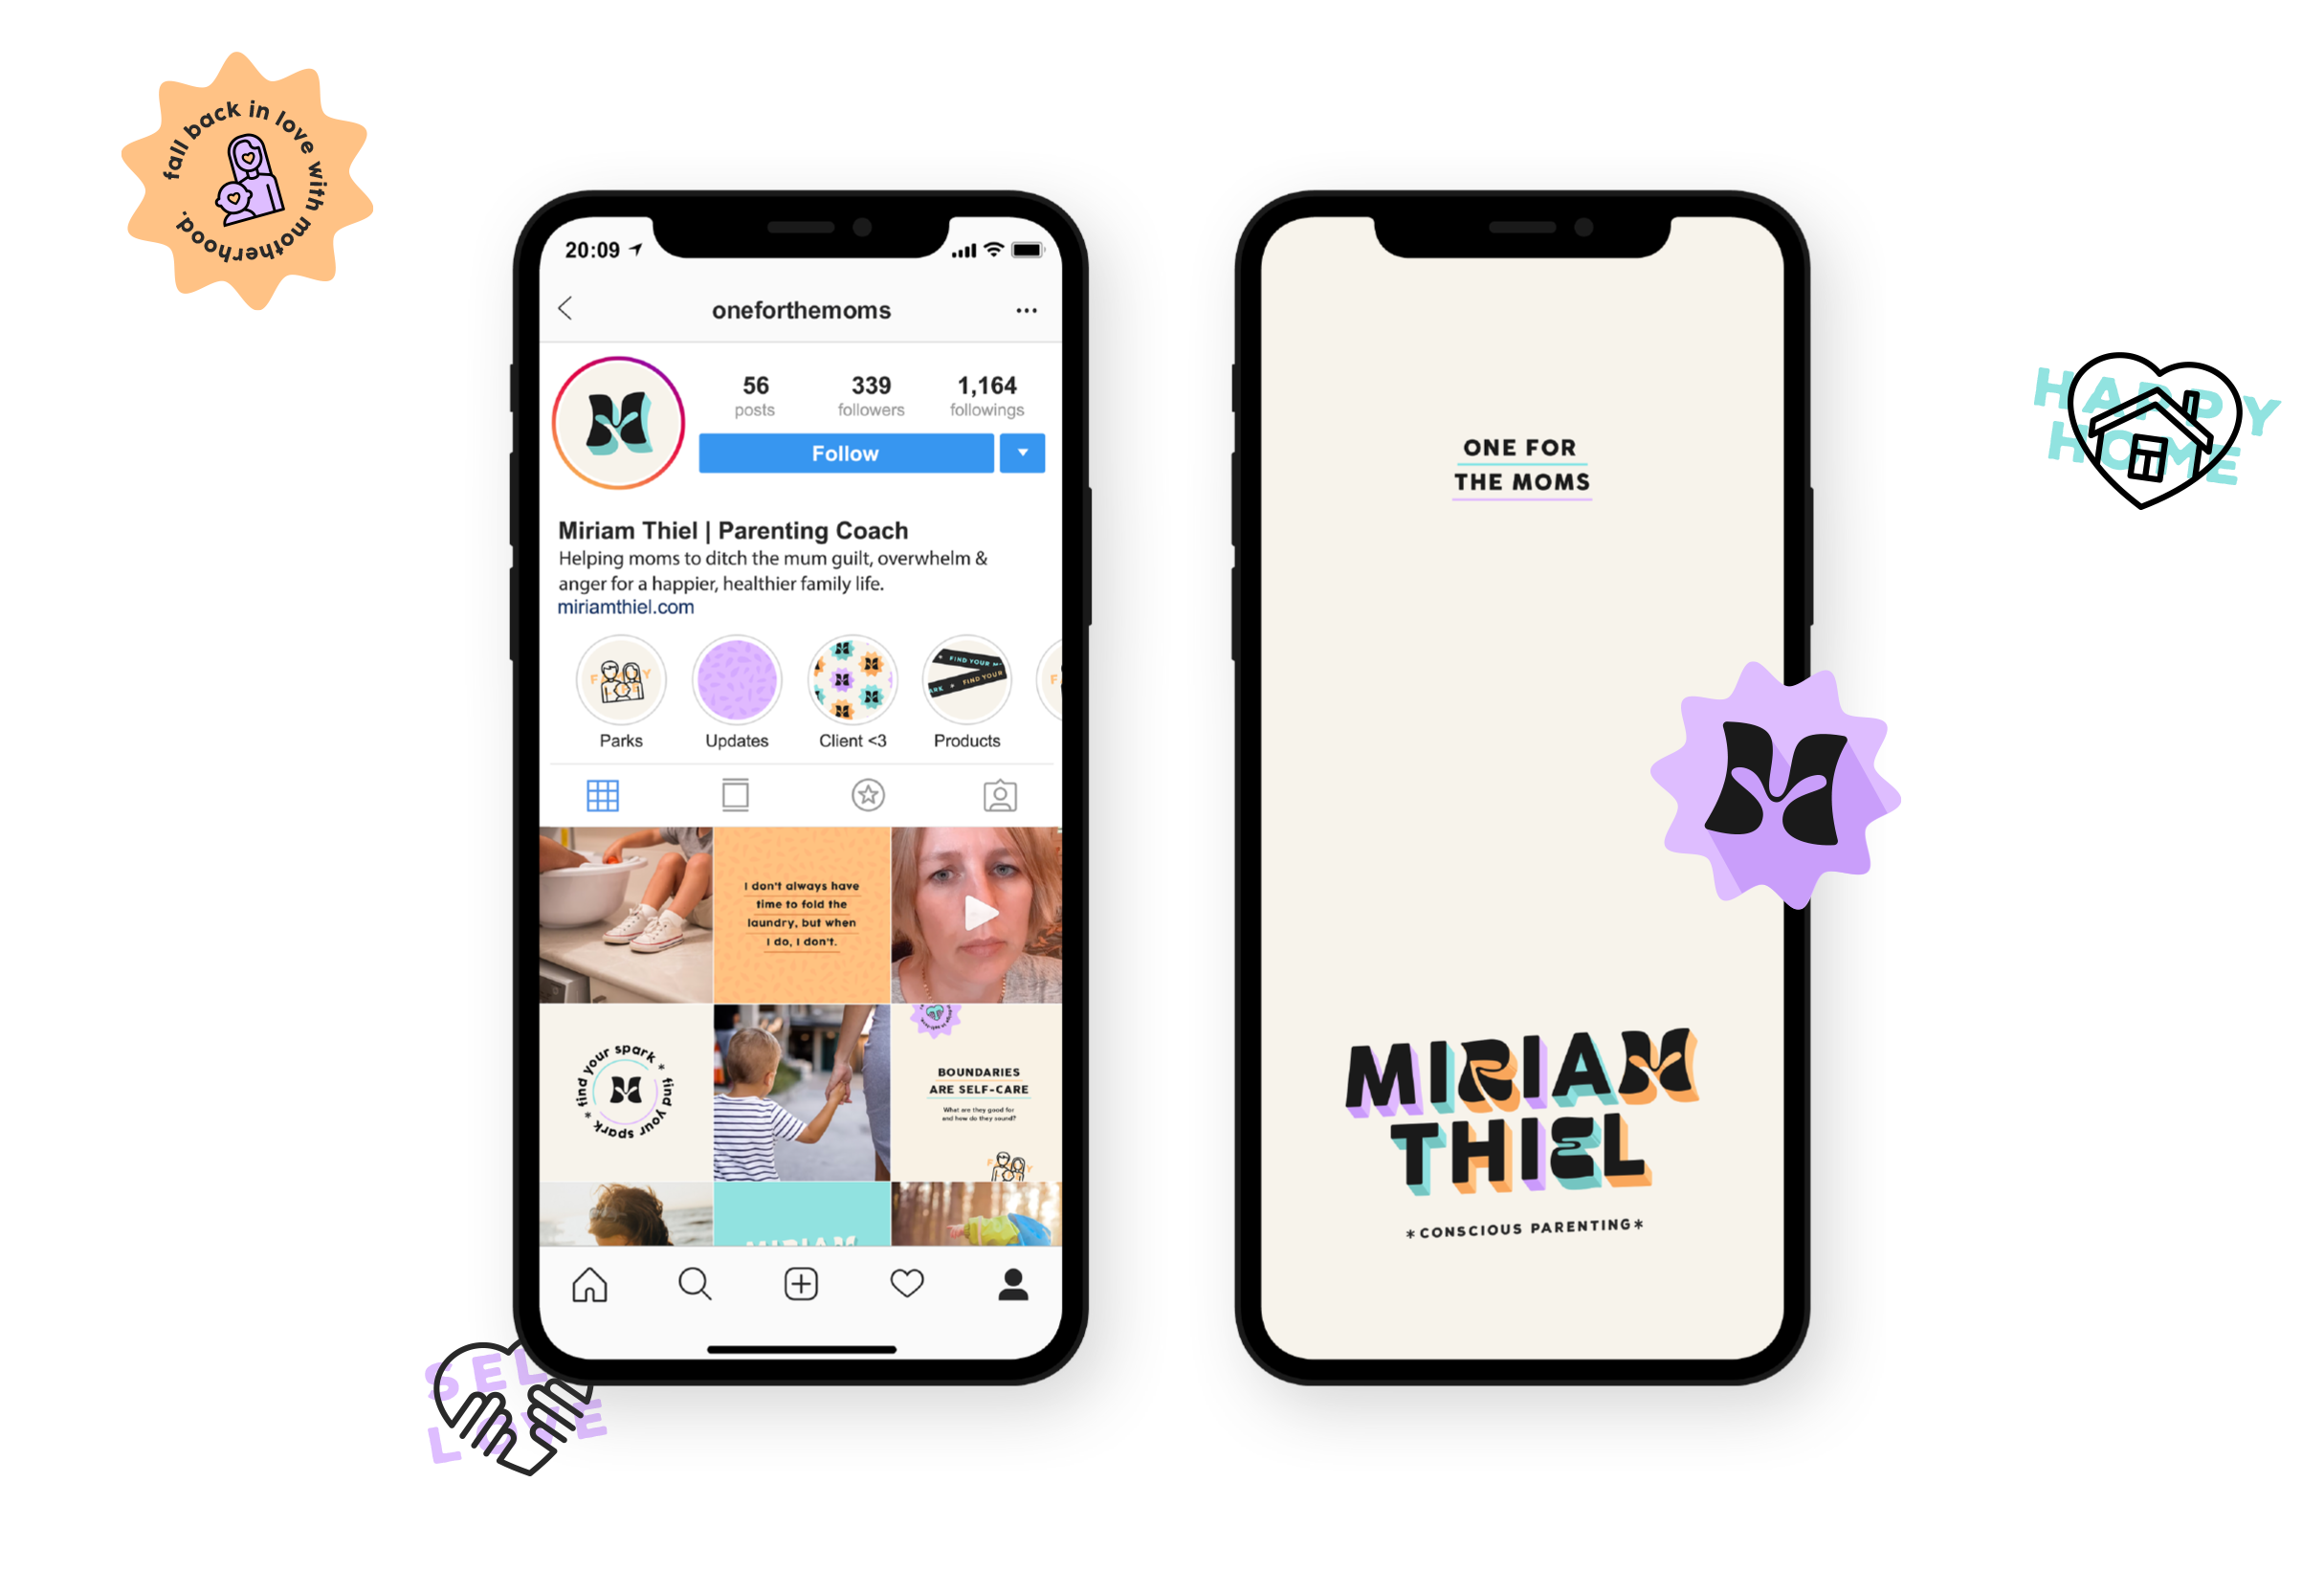 Instagram strategy for Miriam Thiel, conscious parenting coach and breathwork facilitator trained in dealing with childhood trauma - designed by Wiltshire-based graphic designer, Kaye Huett